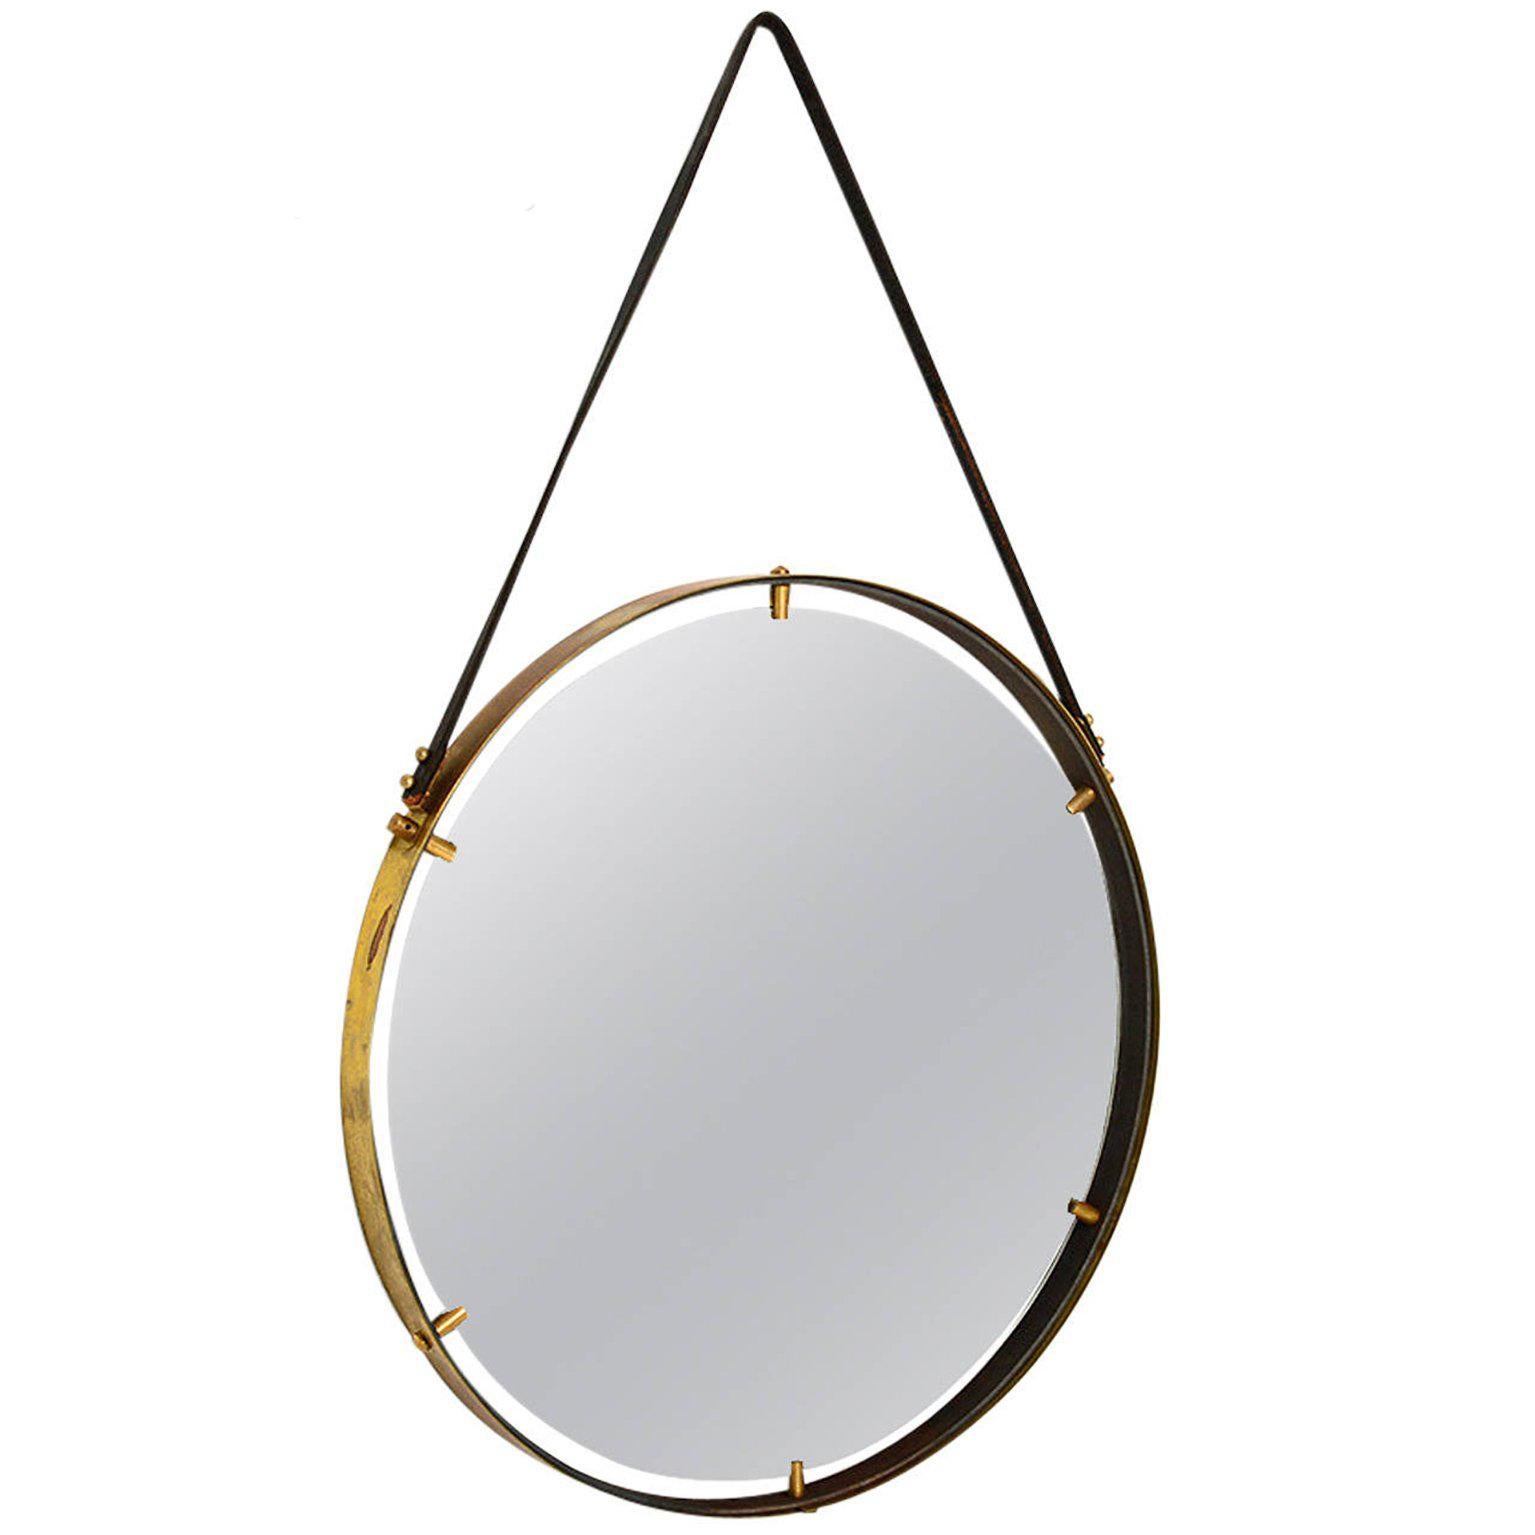 For your consideration a wall hanging mirror. 
Custom-made brass frame with solid brass hardware and vintage leather straps.

Inspired in vintage frame mirror. This is a contemporary reproduction only five available.